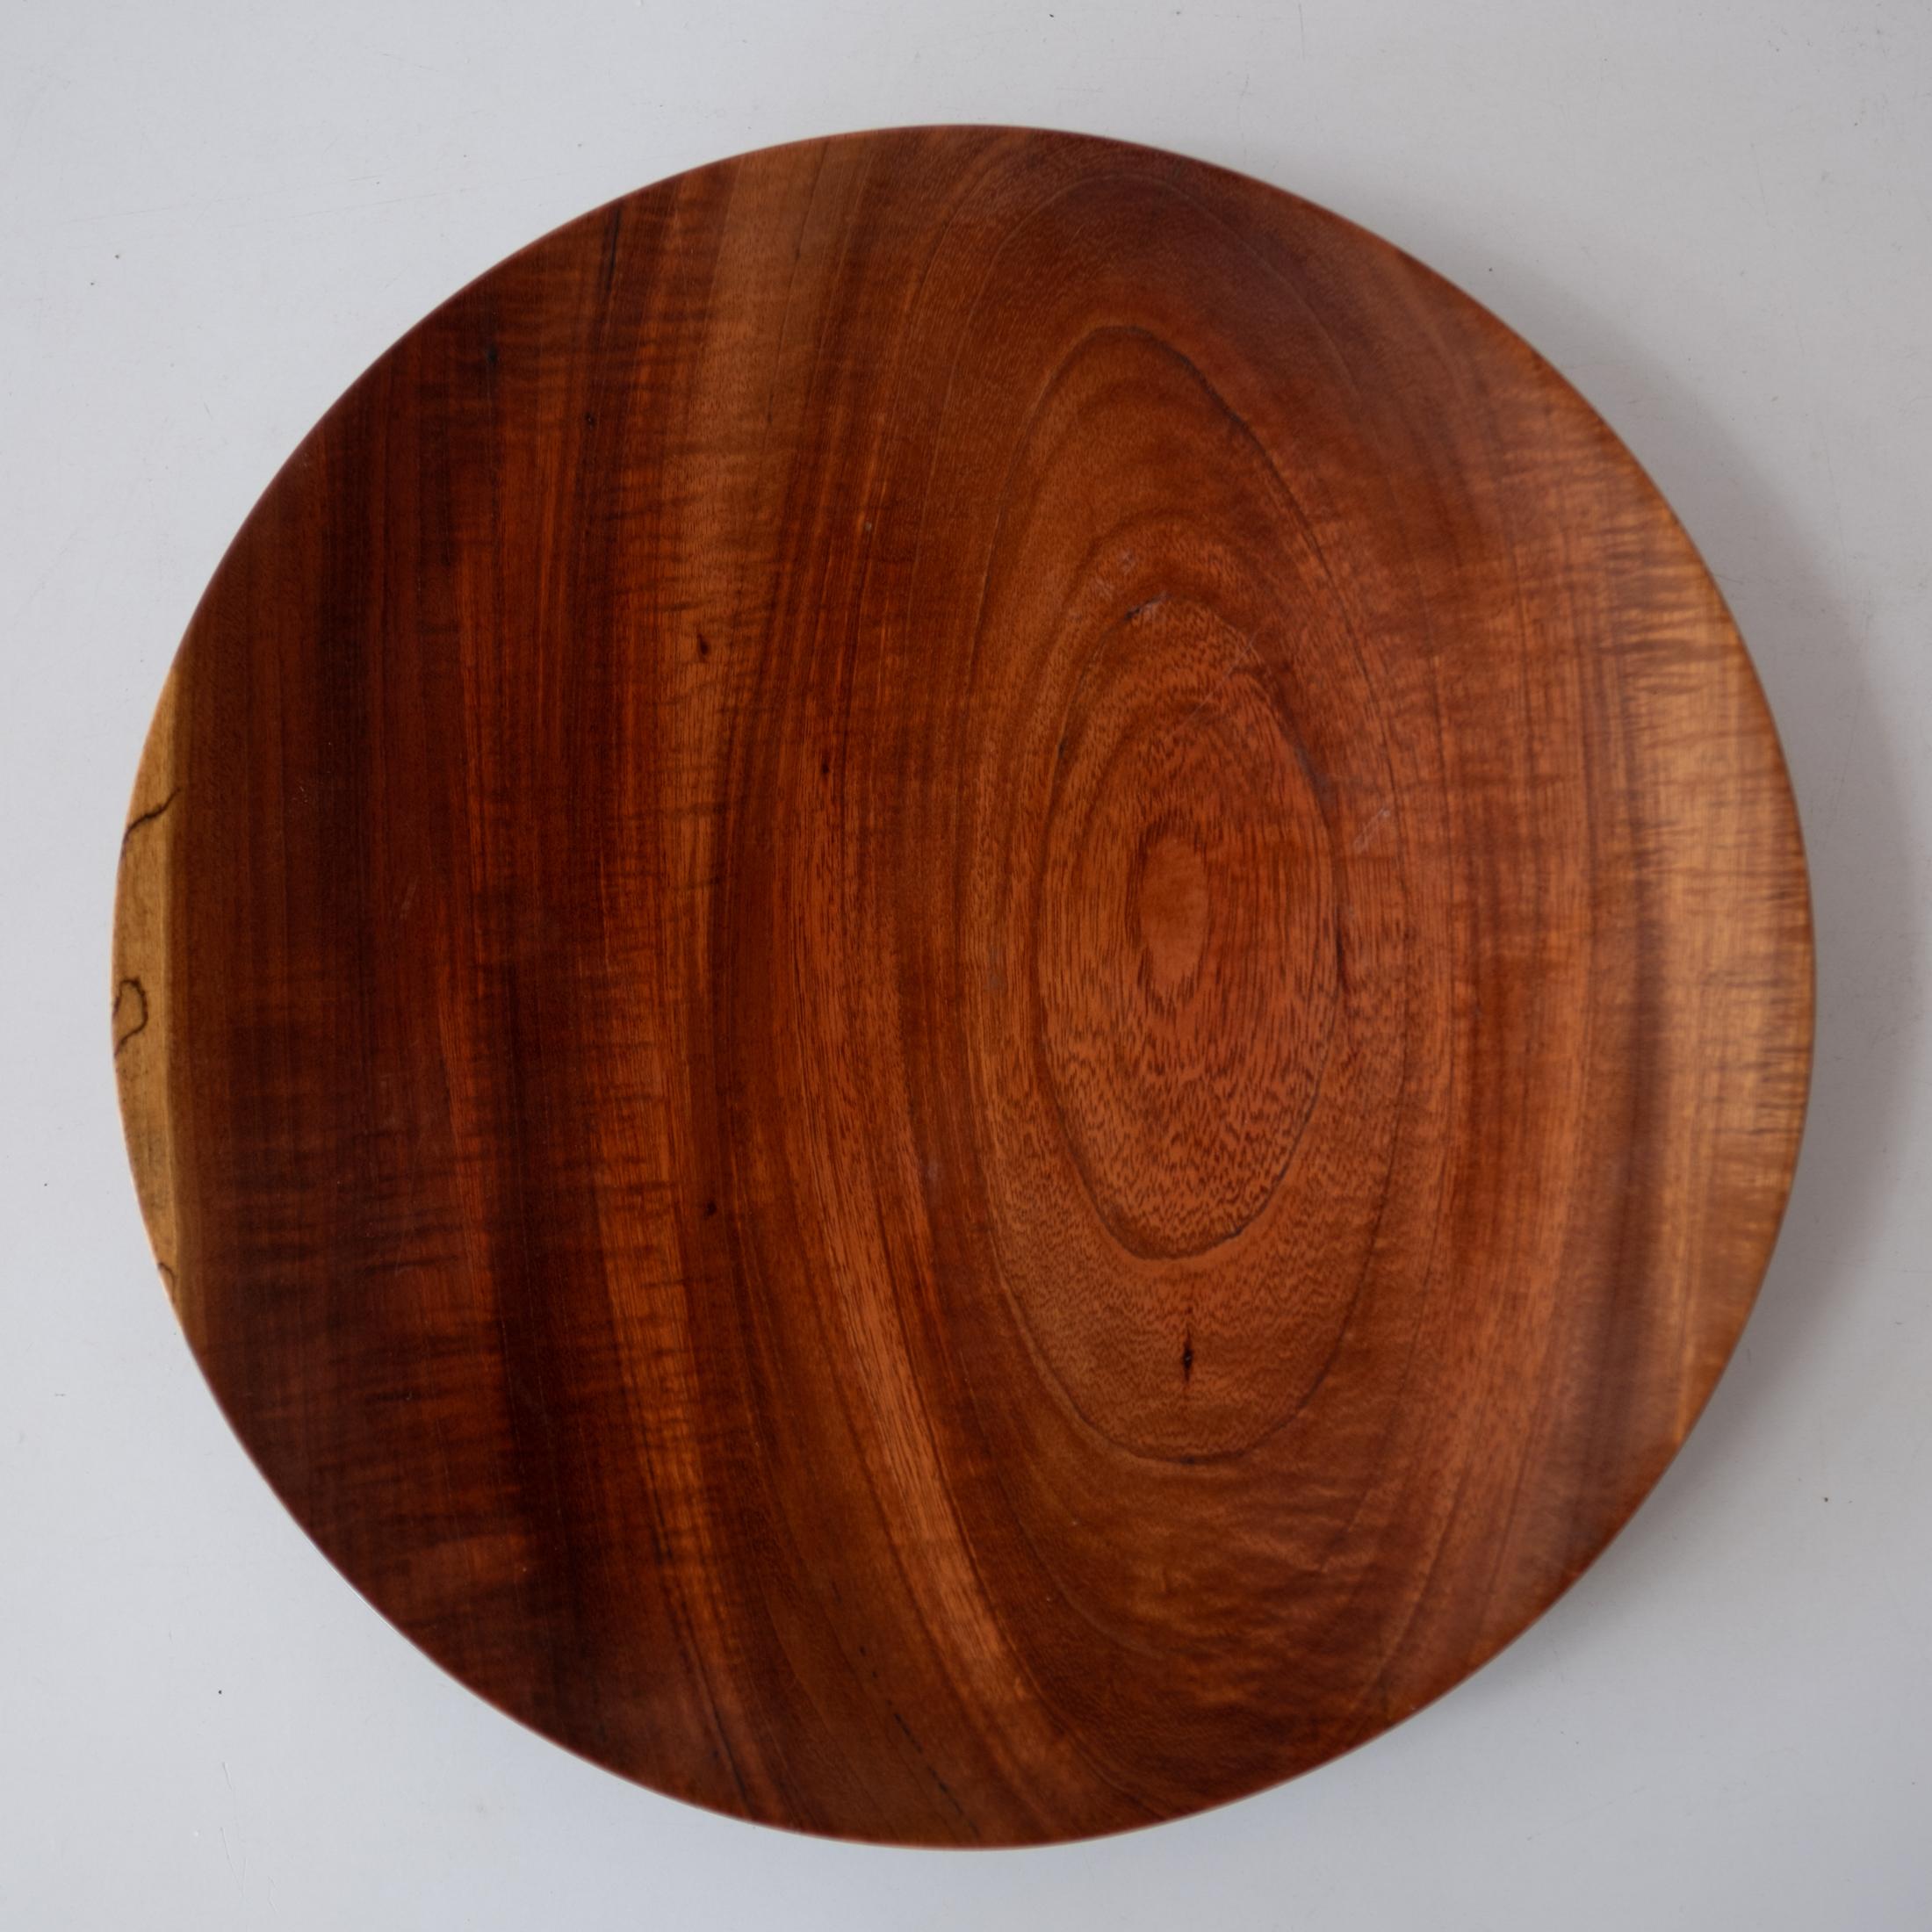 Low bowl or plate by legendary craftsman Bob Stocksdale. Beautiful grain. Signed on the bottom. This was purchased from Pamela Weir-Quiton, who acquired it directly from Bob Stocksdale. The piece was turned from Purple Heart wood from